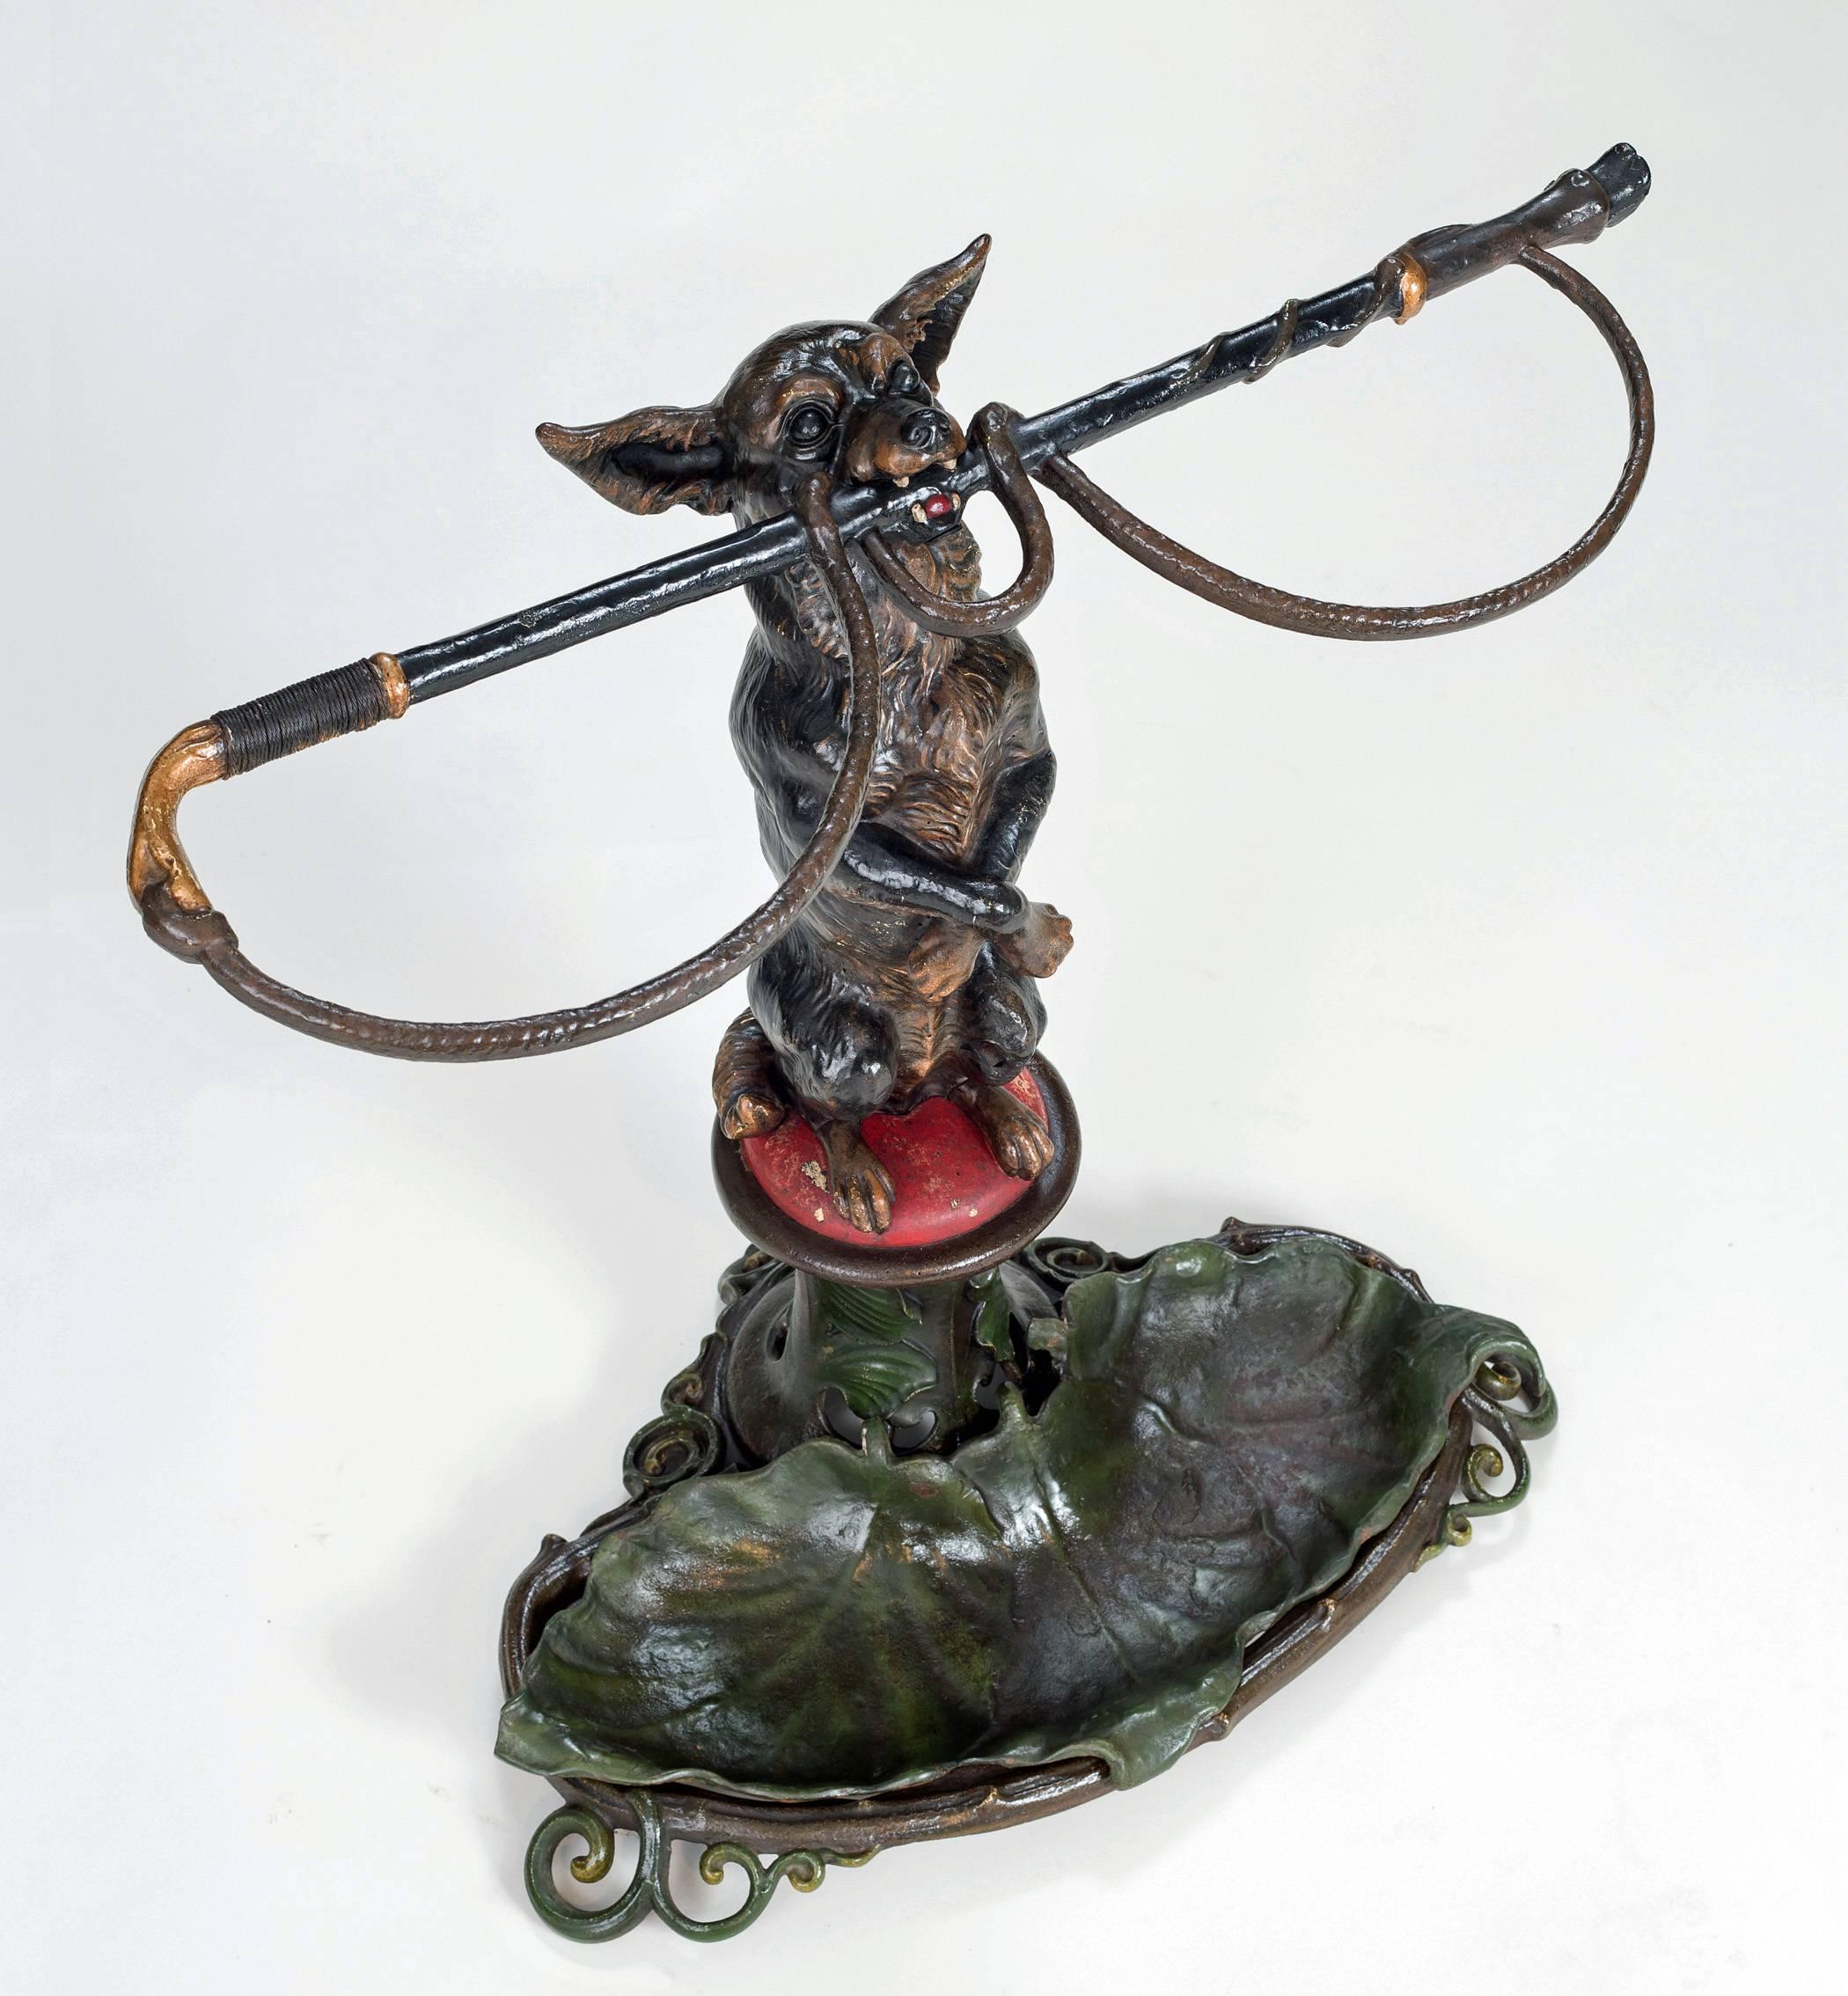 Superb Coalbrookdale cast iron stick or umbrella stand in the form of a chihuahua with a riding crop in its mouth sitting on hind legs on a red cushion with front legs crossed. The removable green drip tray is in the shape of lily pads, the reverse